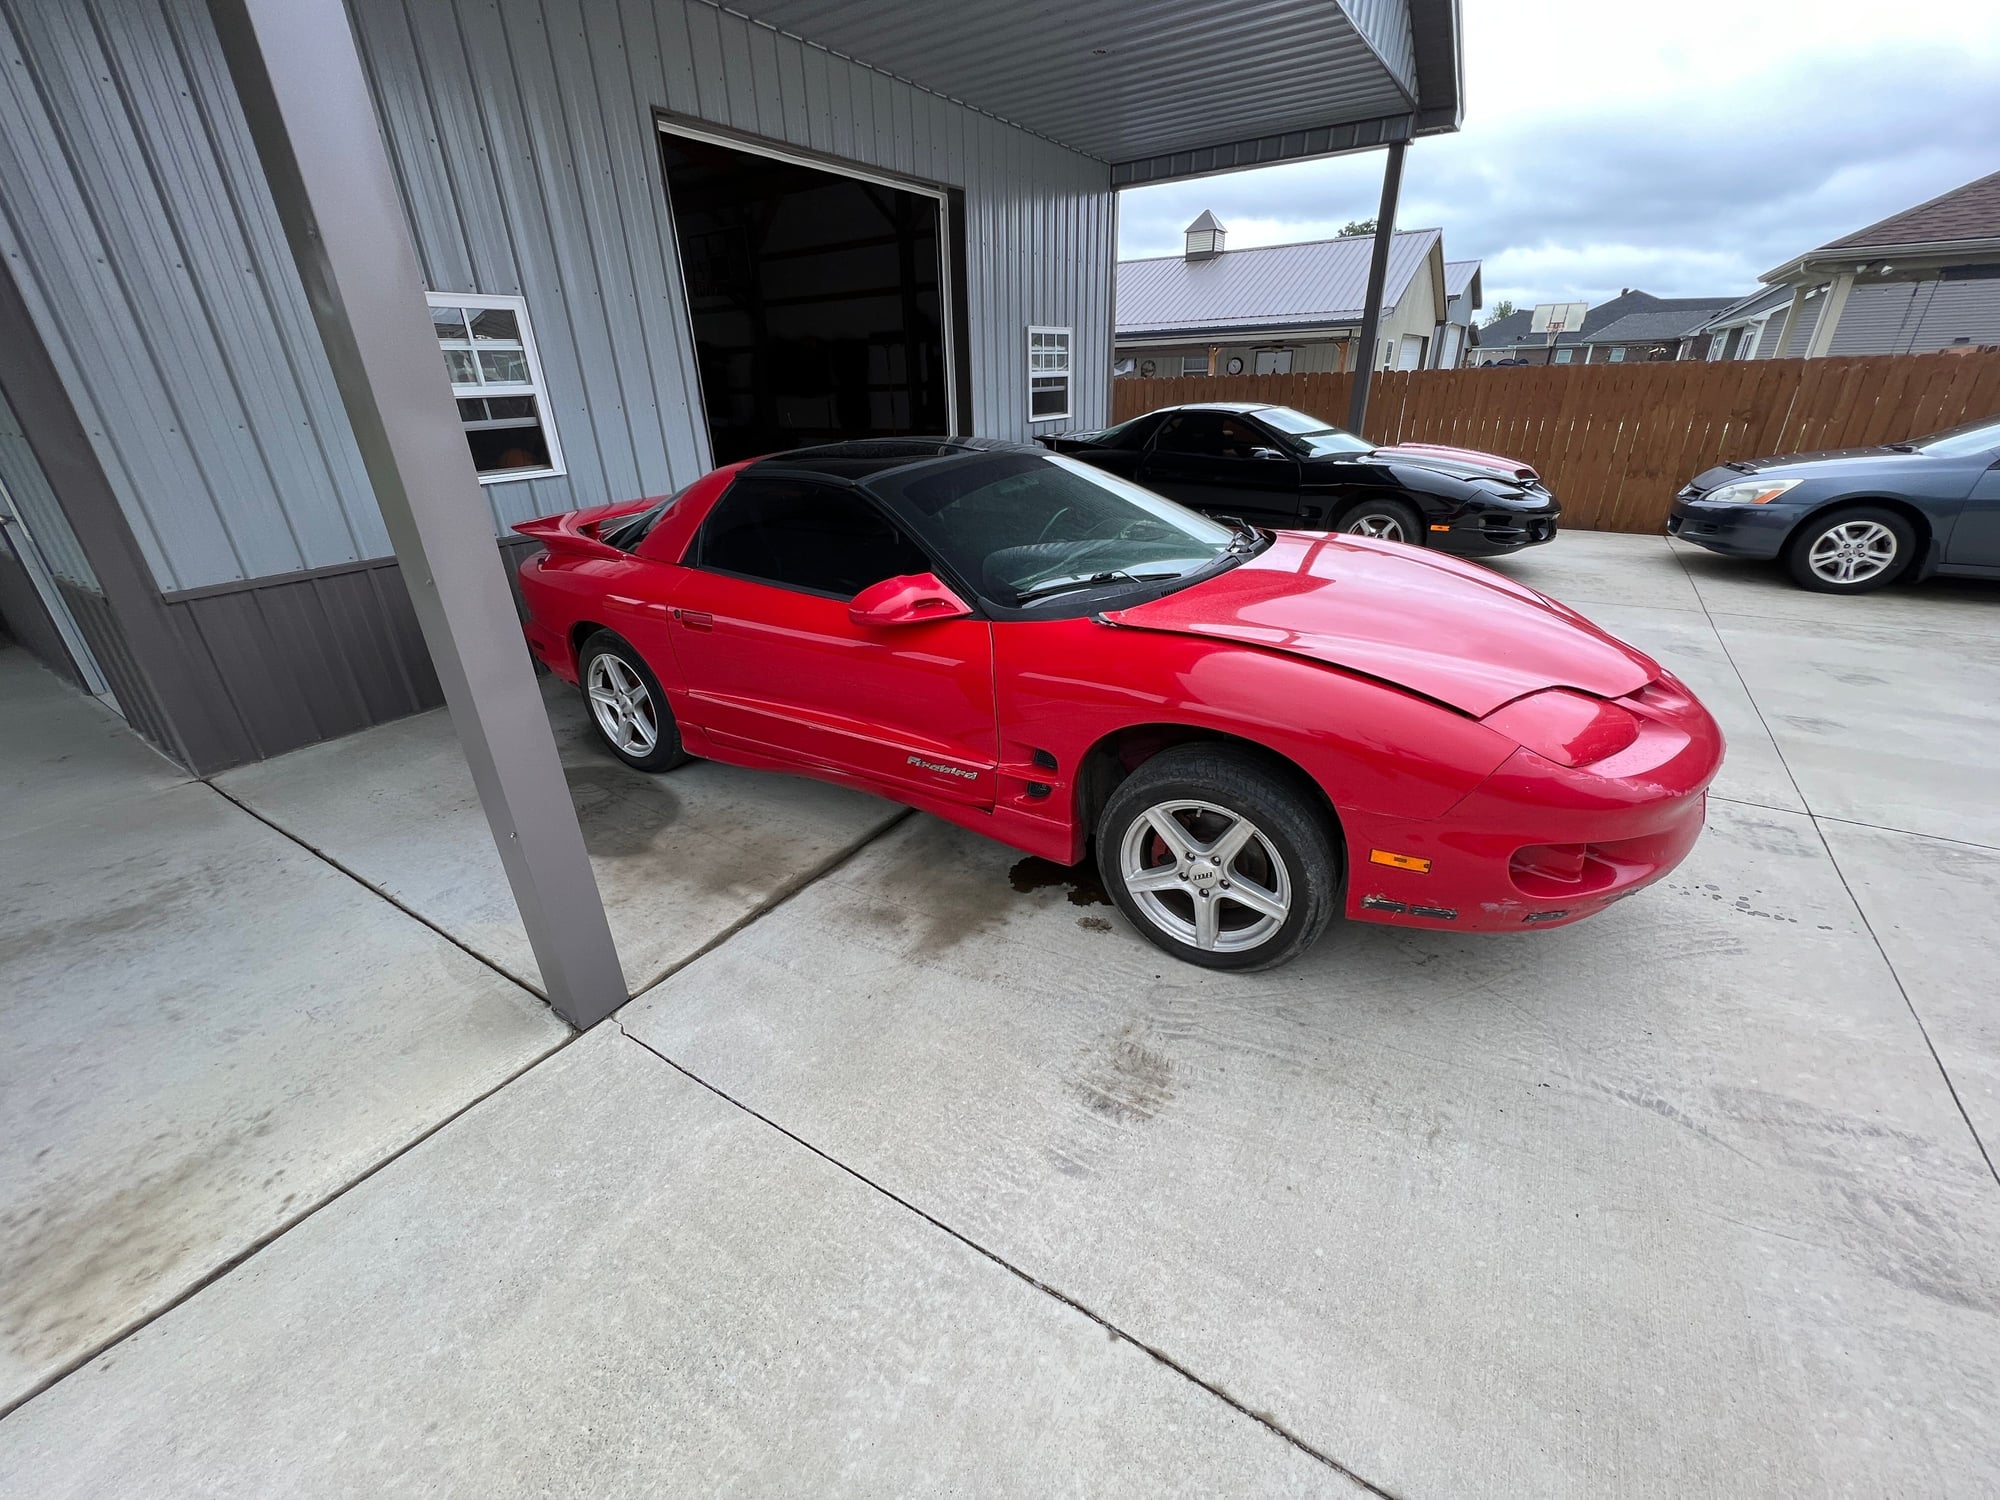 Miscellaneous - 2000 Firebird roller - Used - 0  All Models - Owensboro, KY 42301, United States